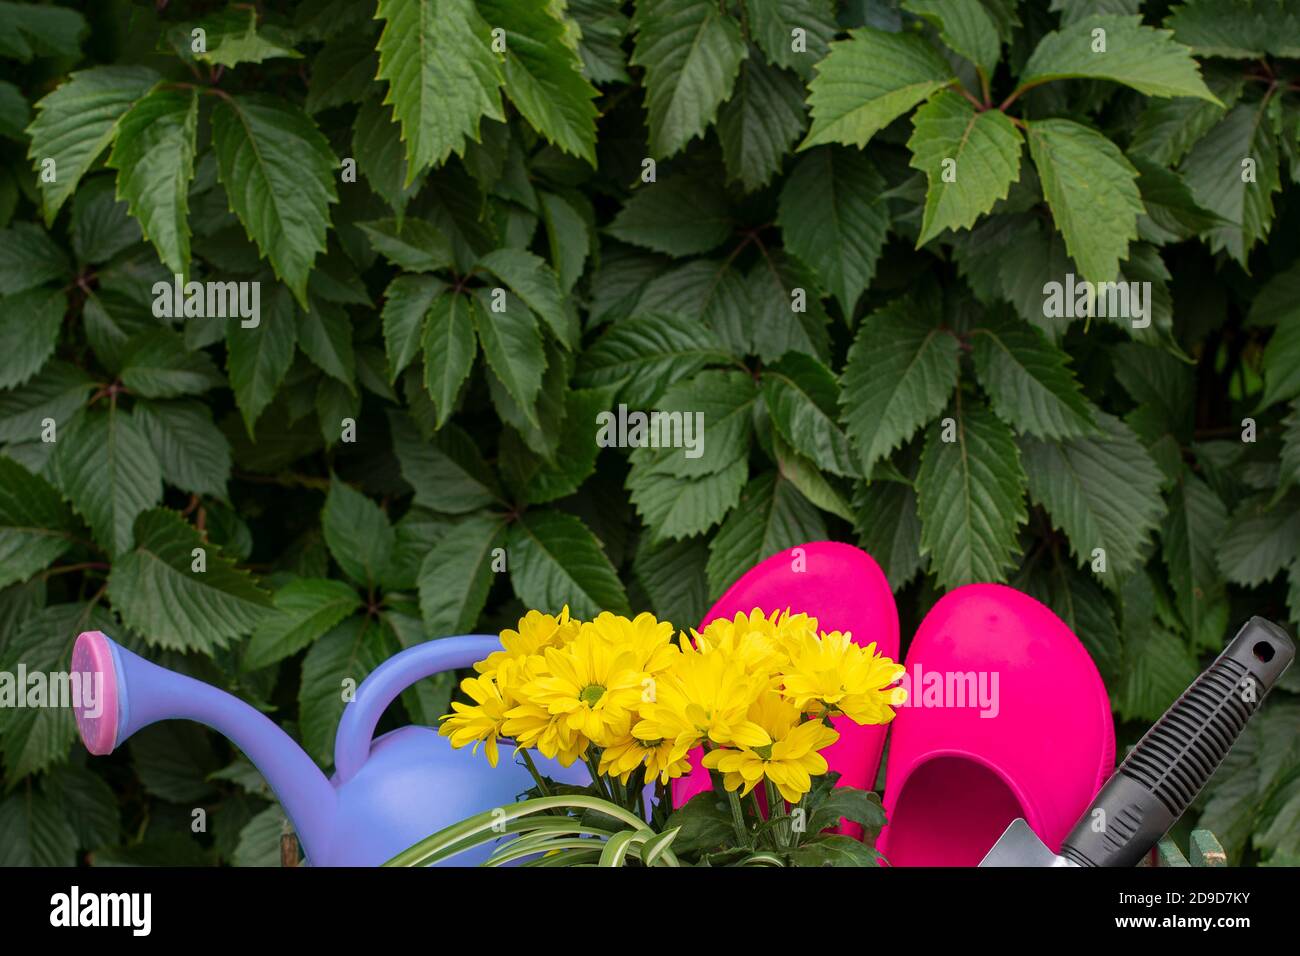 Gardening. work in the garden. tools, watering can and flower on a background of green leaves. Copy space. Wild grapes. climbing plants vine Stock Photo